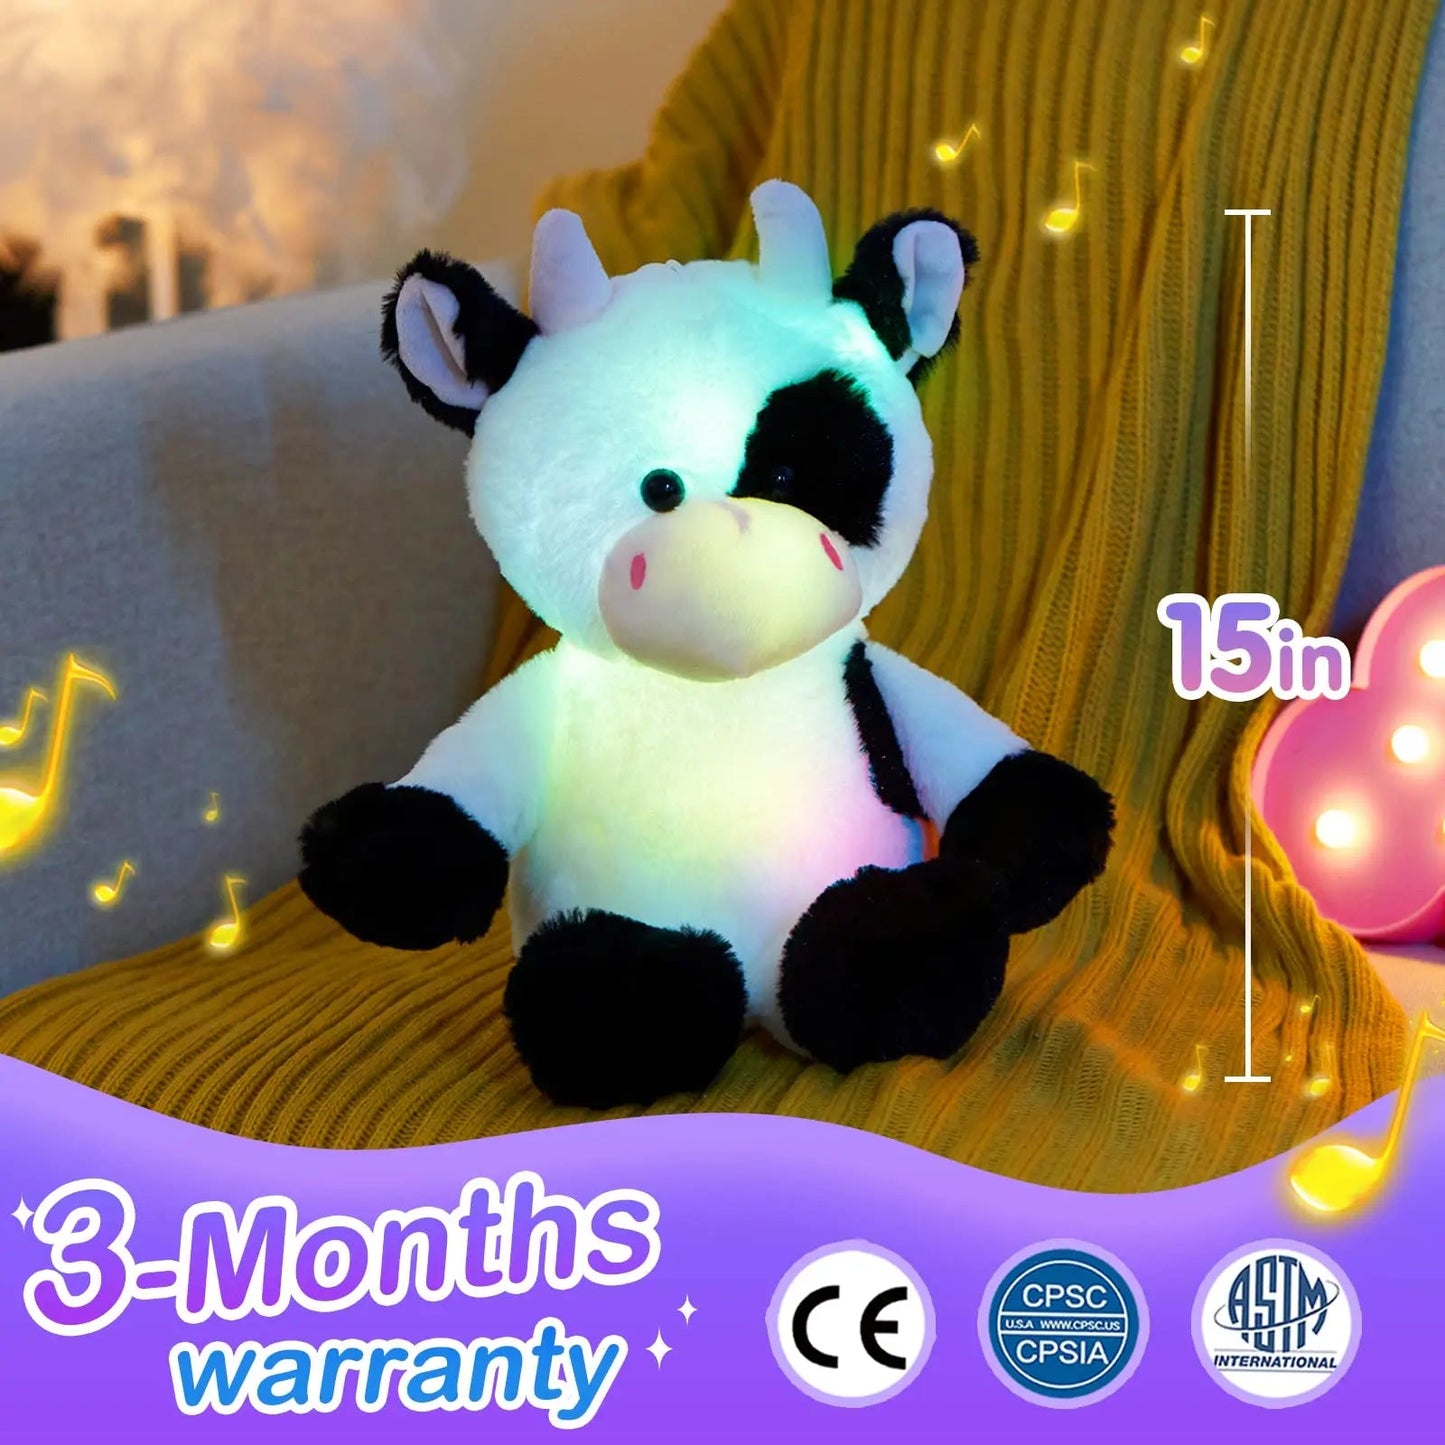 Light-Up 38cm Plush Cow Toy with Lullaby Music - ToylandEU